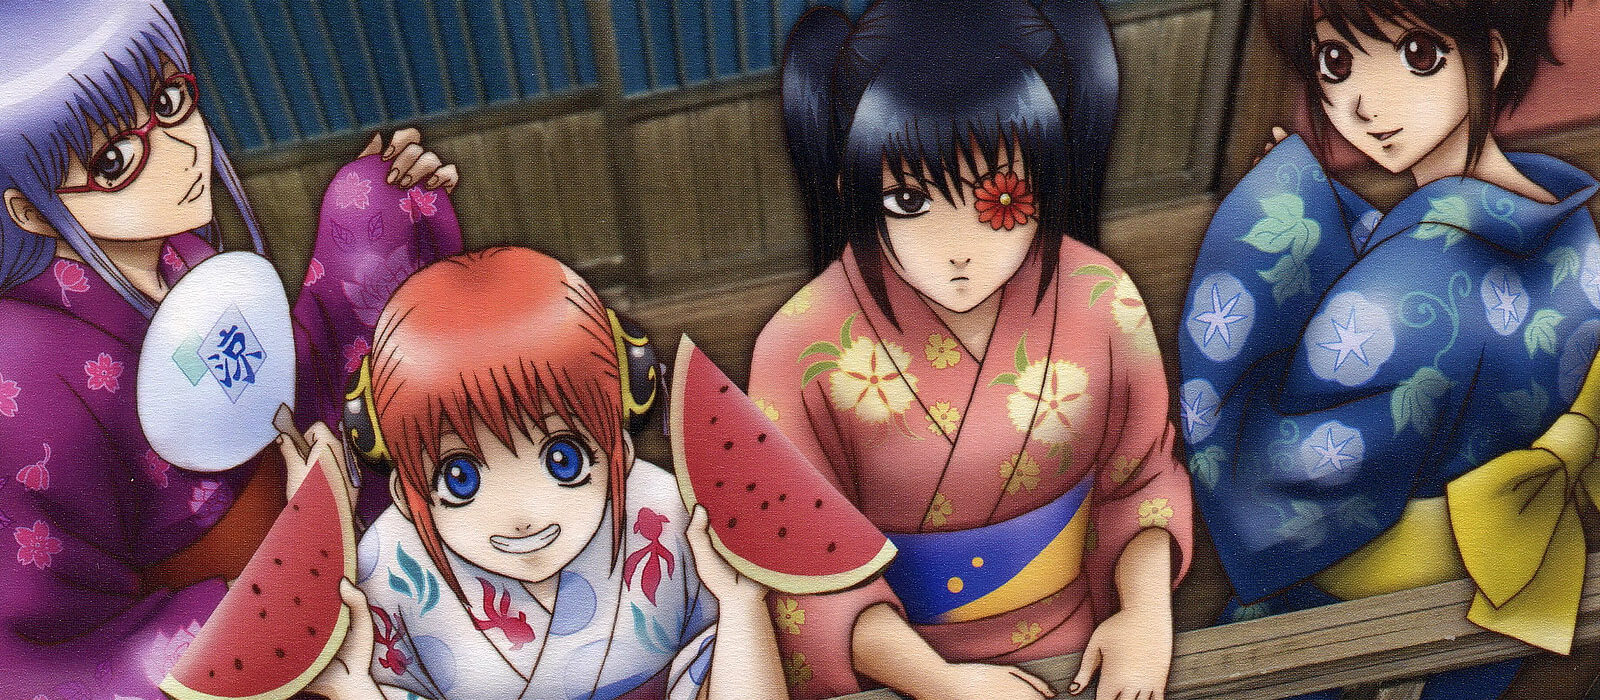 Group image of the women of Gintama